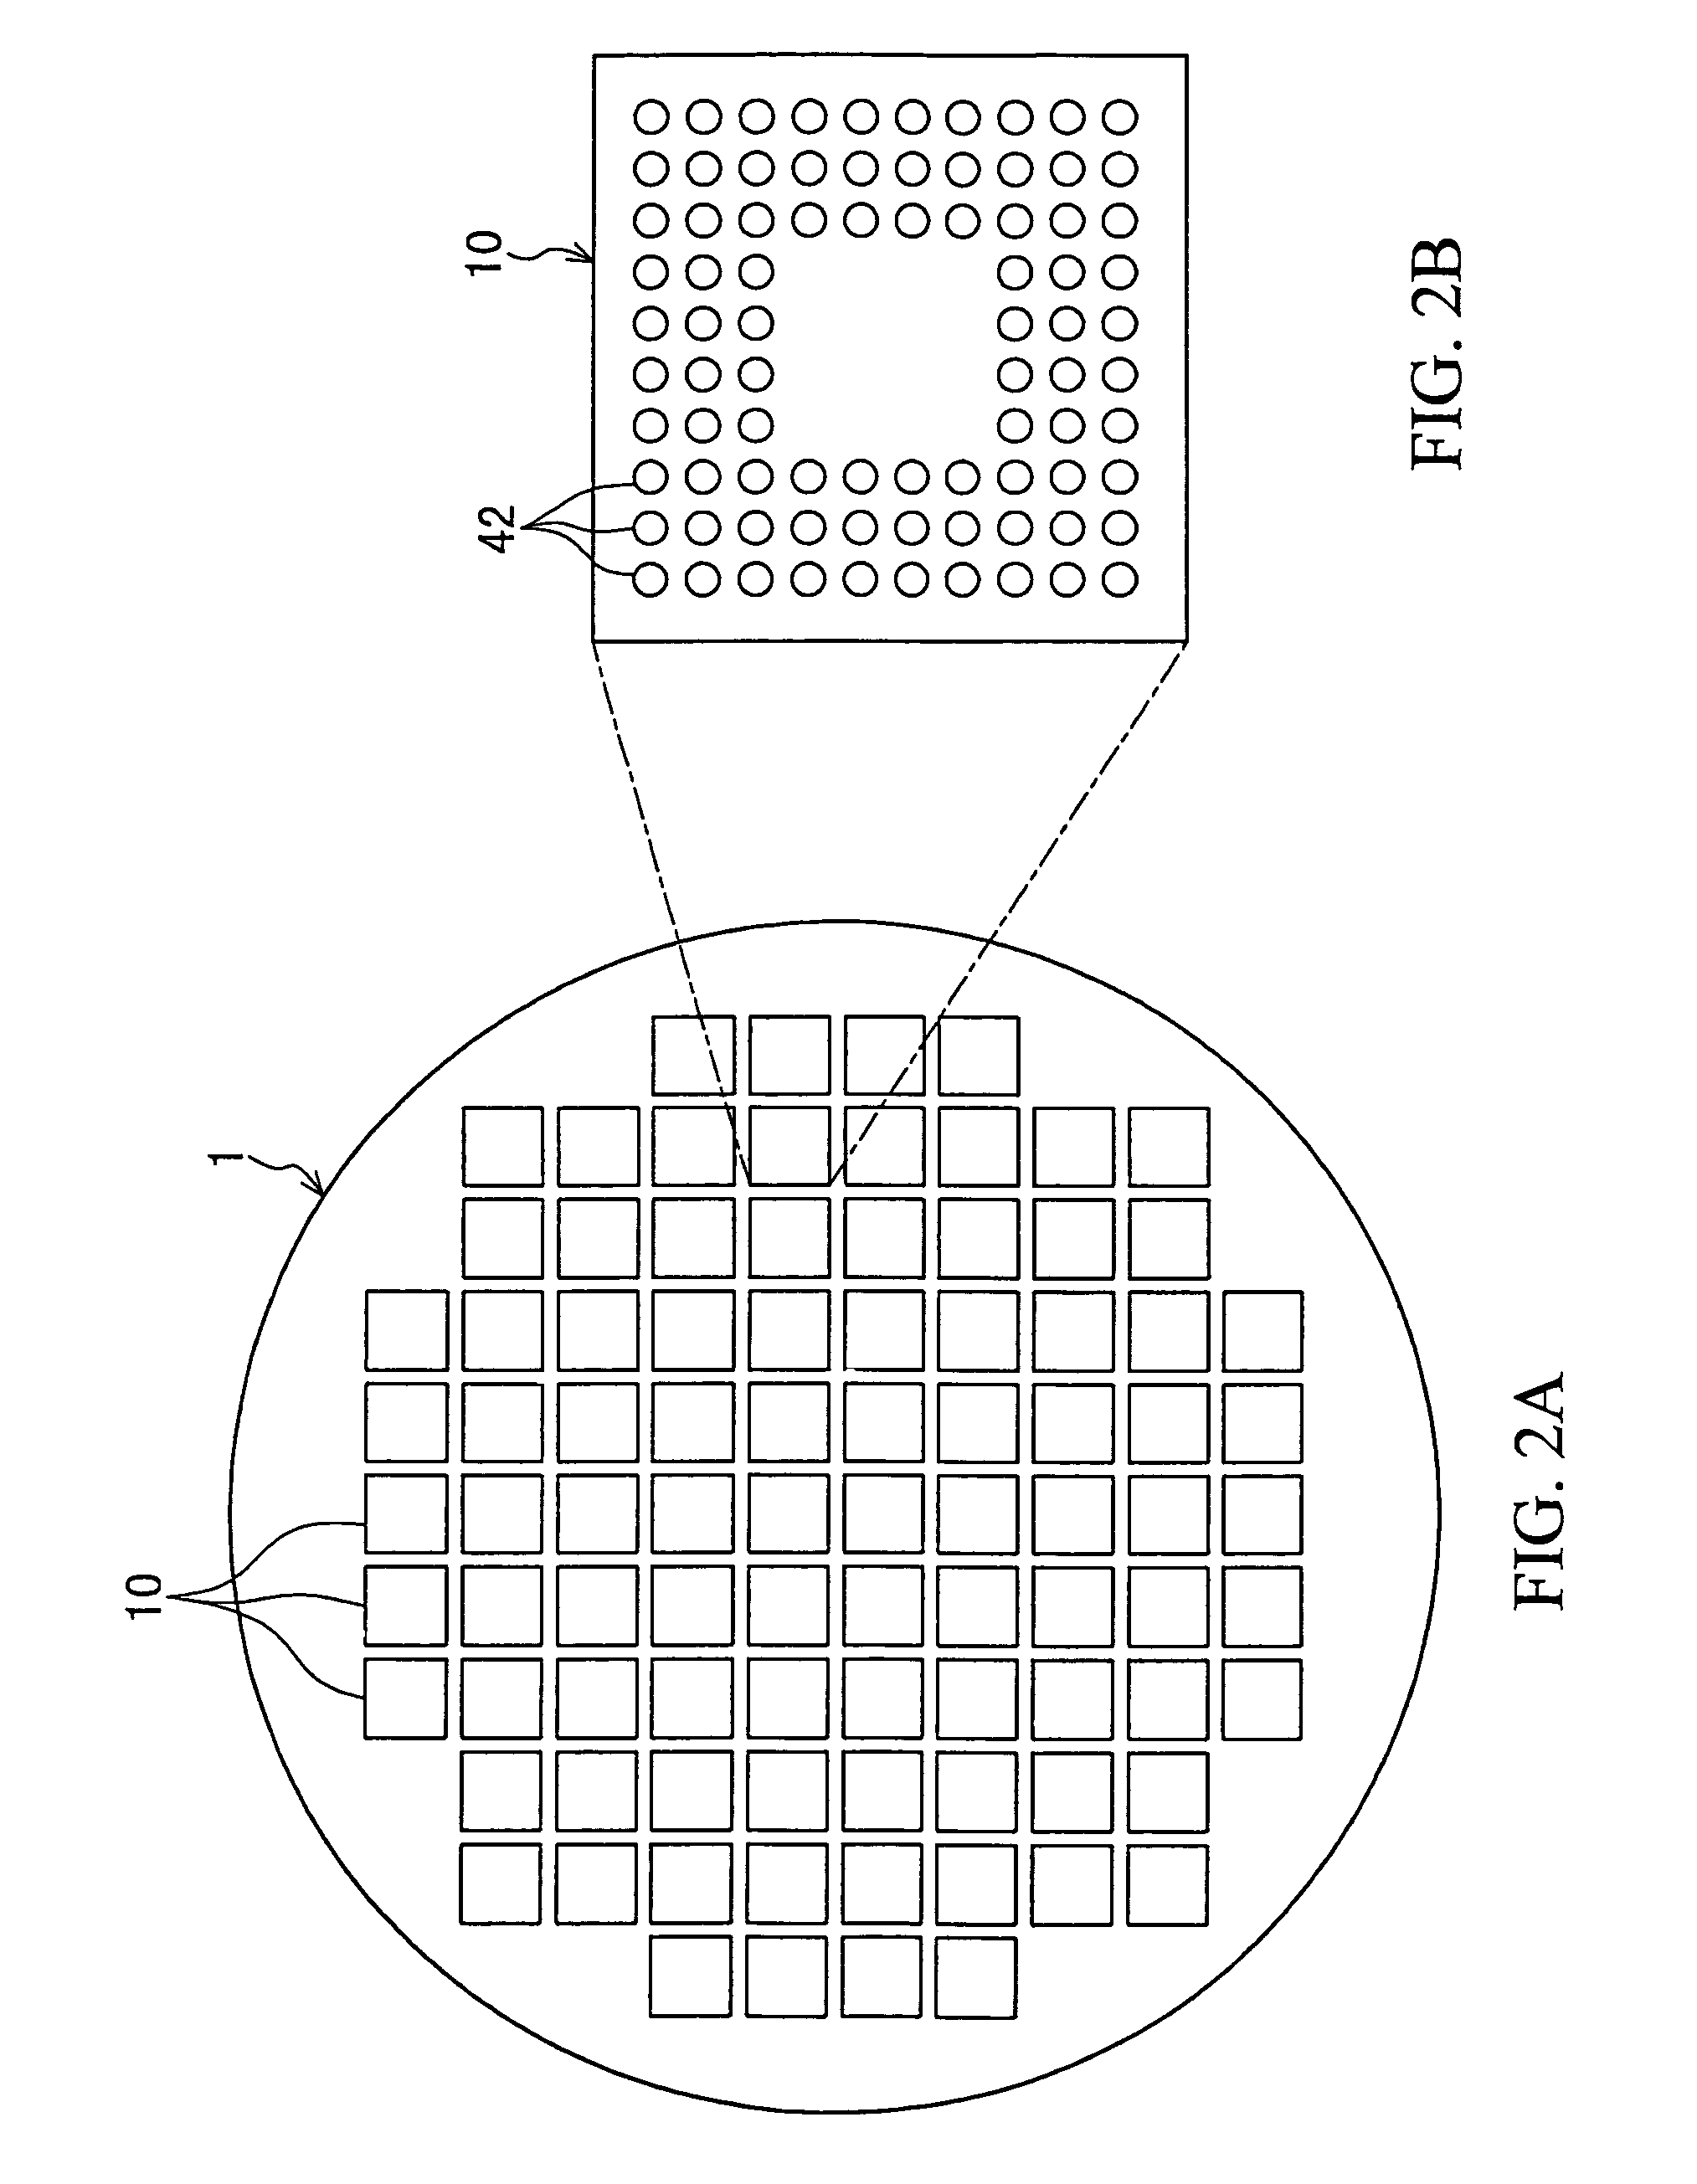 Method of fabricating a conductive post on an electrode